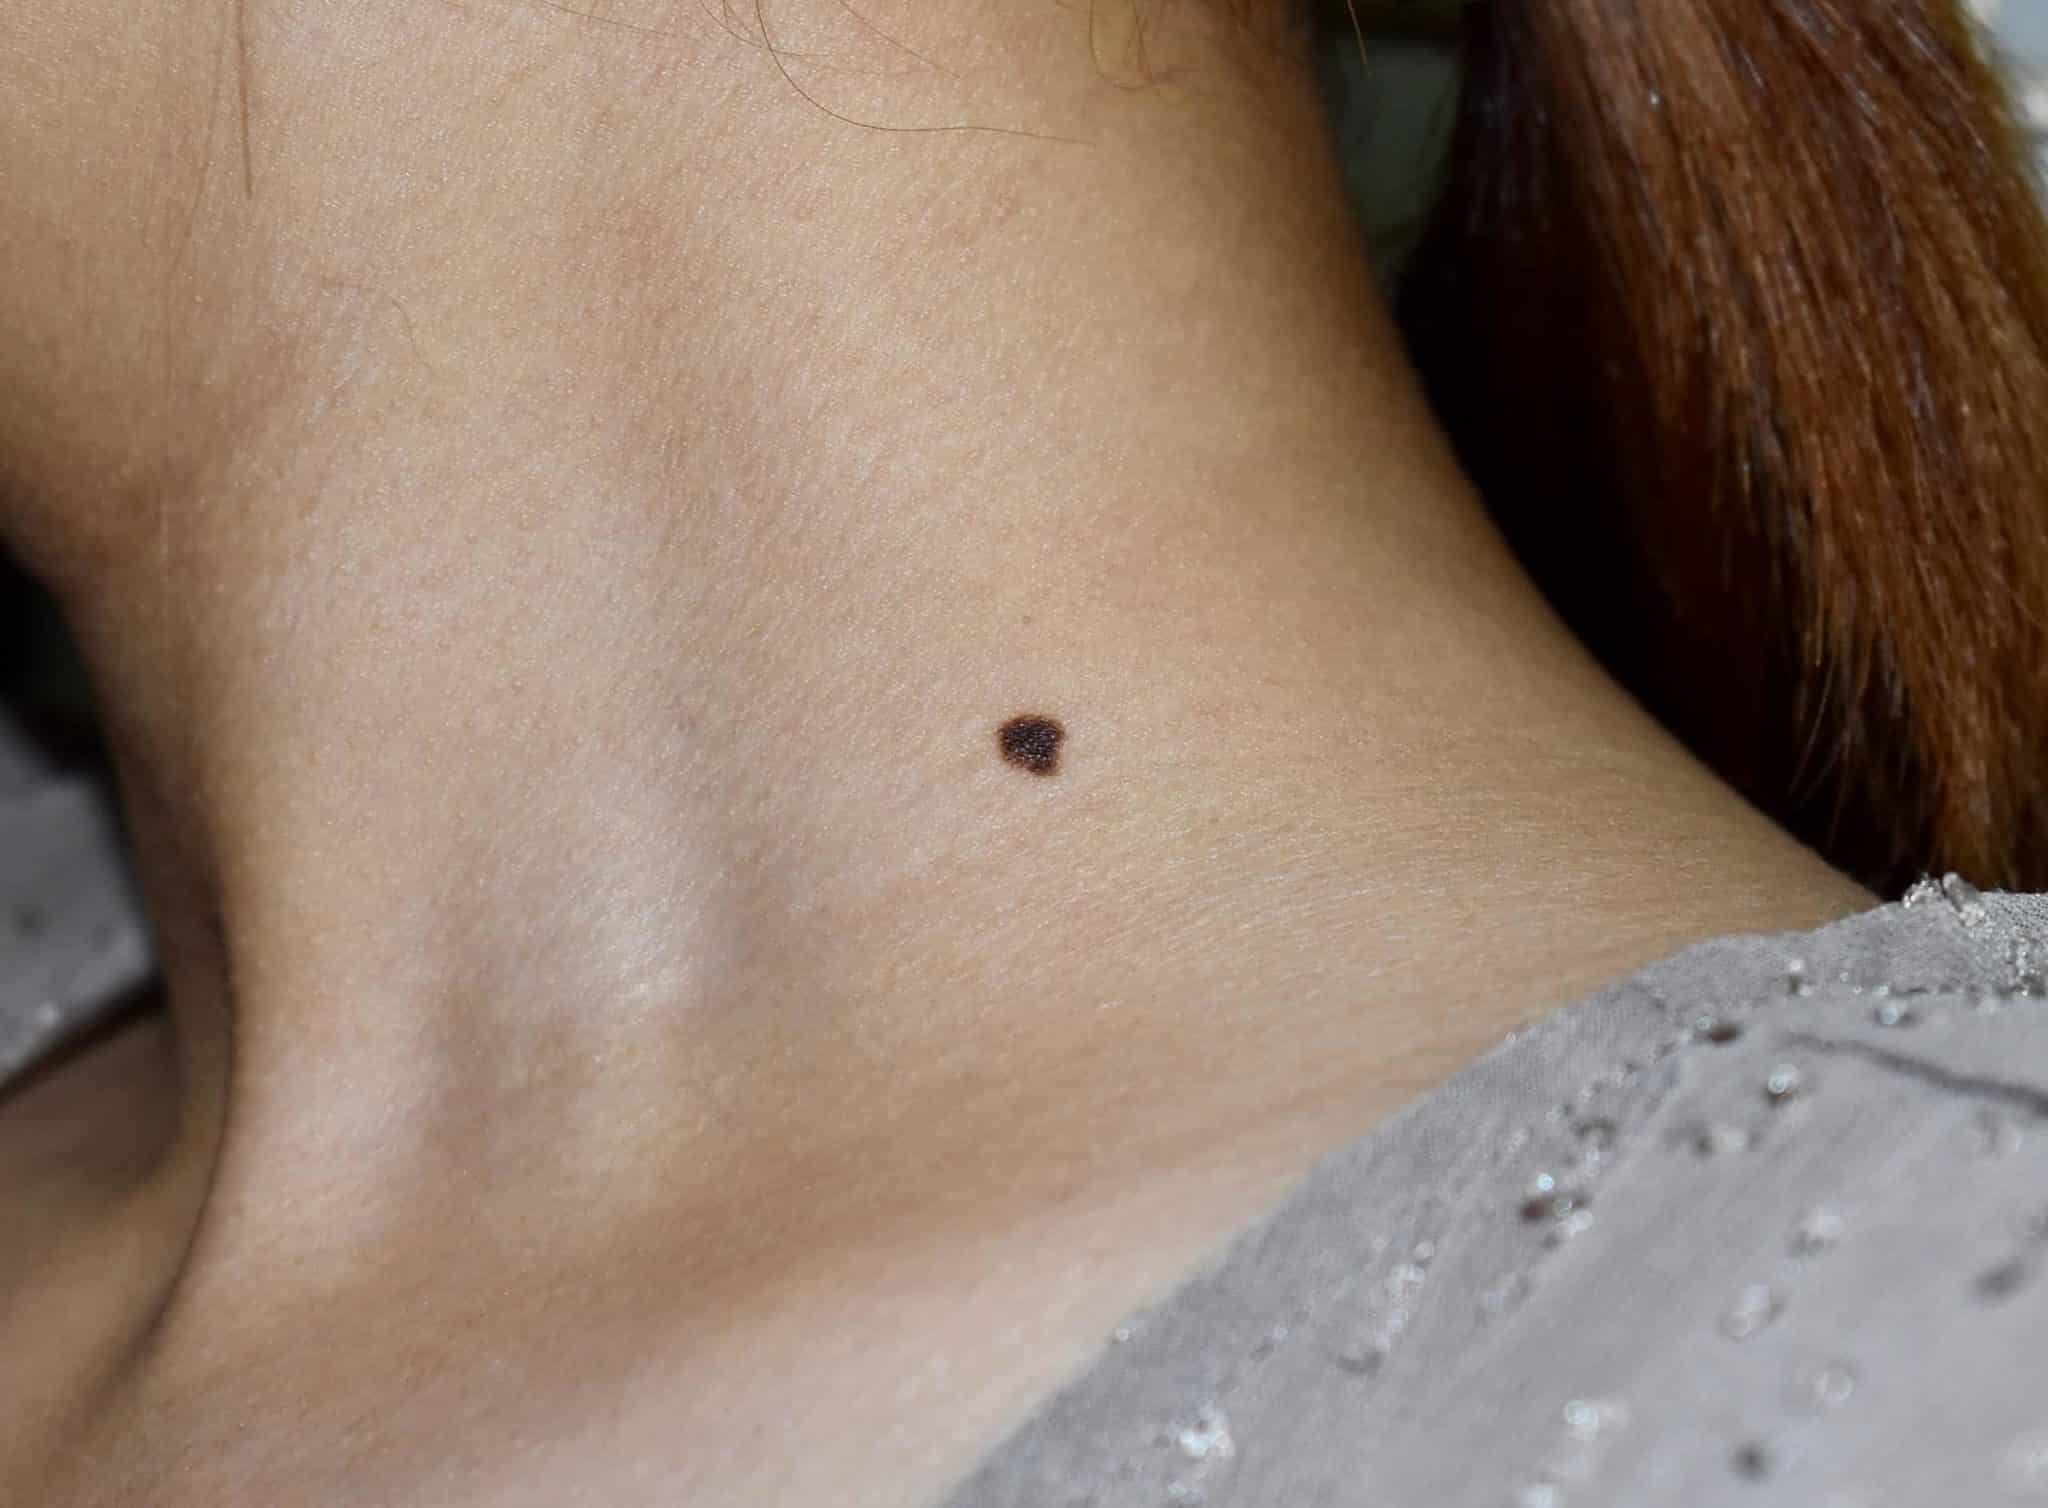 What does a breast cancer mole look like